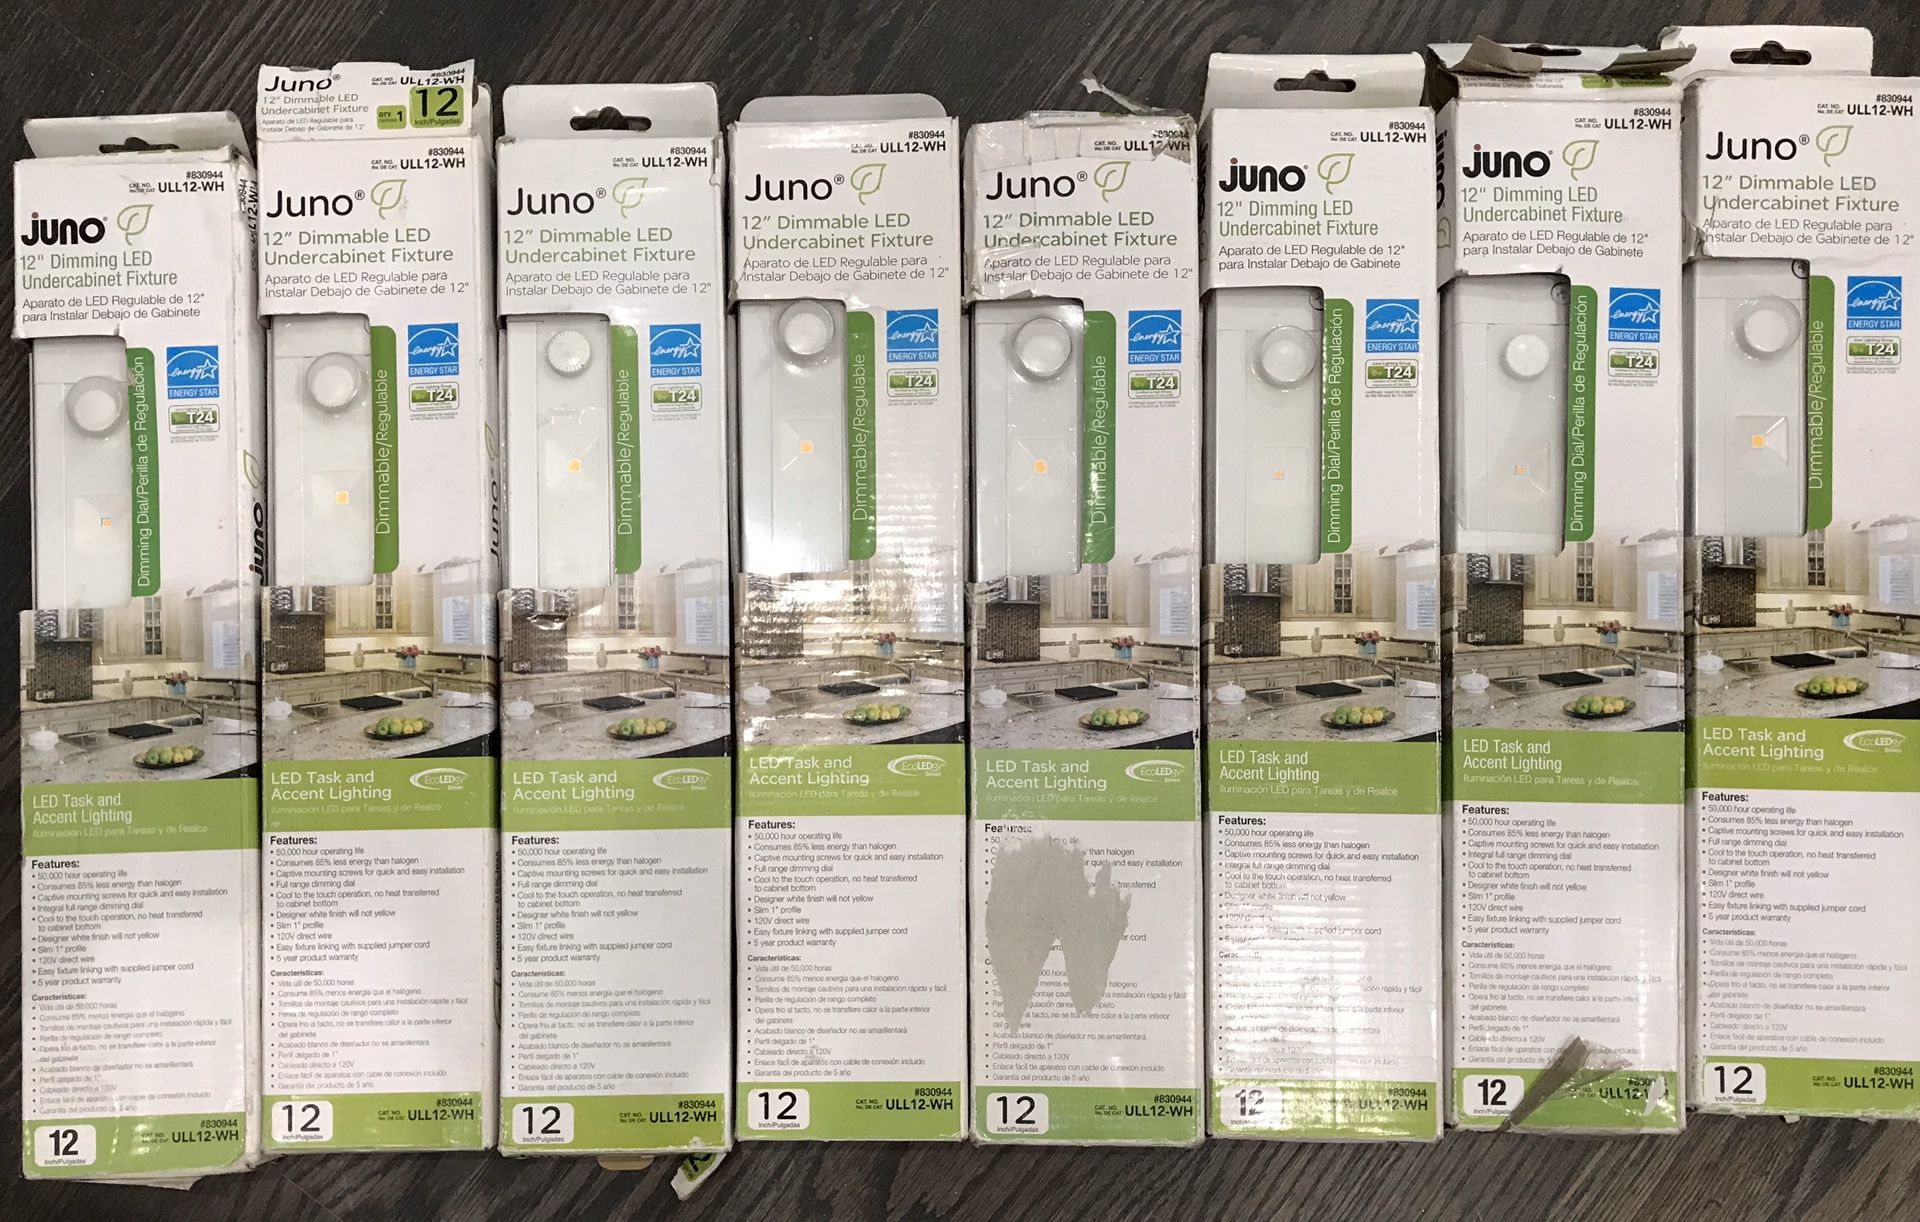 Juno LED Dimmable under cabinet lighting